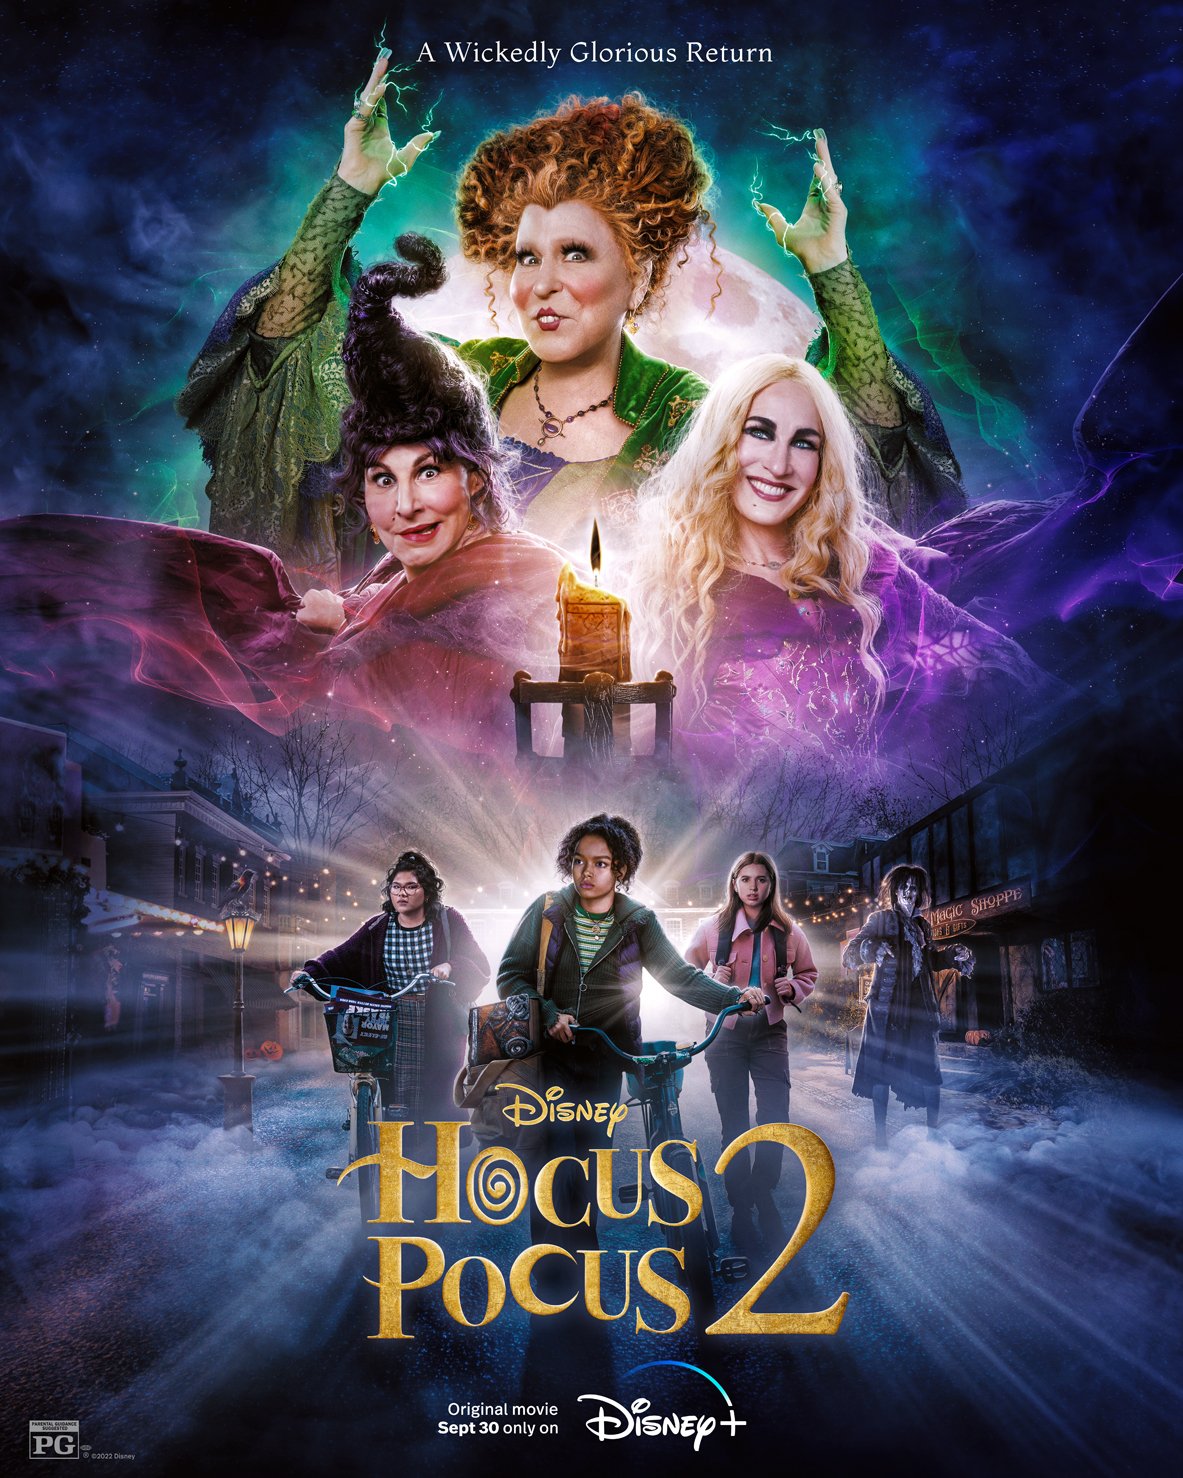 The Sanderson sisters in the background of new teens in danger in the Hocus Pocus 2 poster